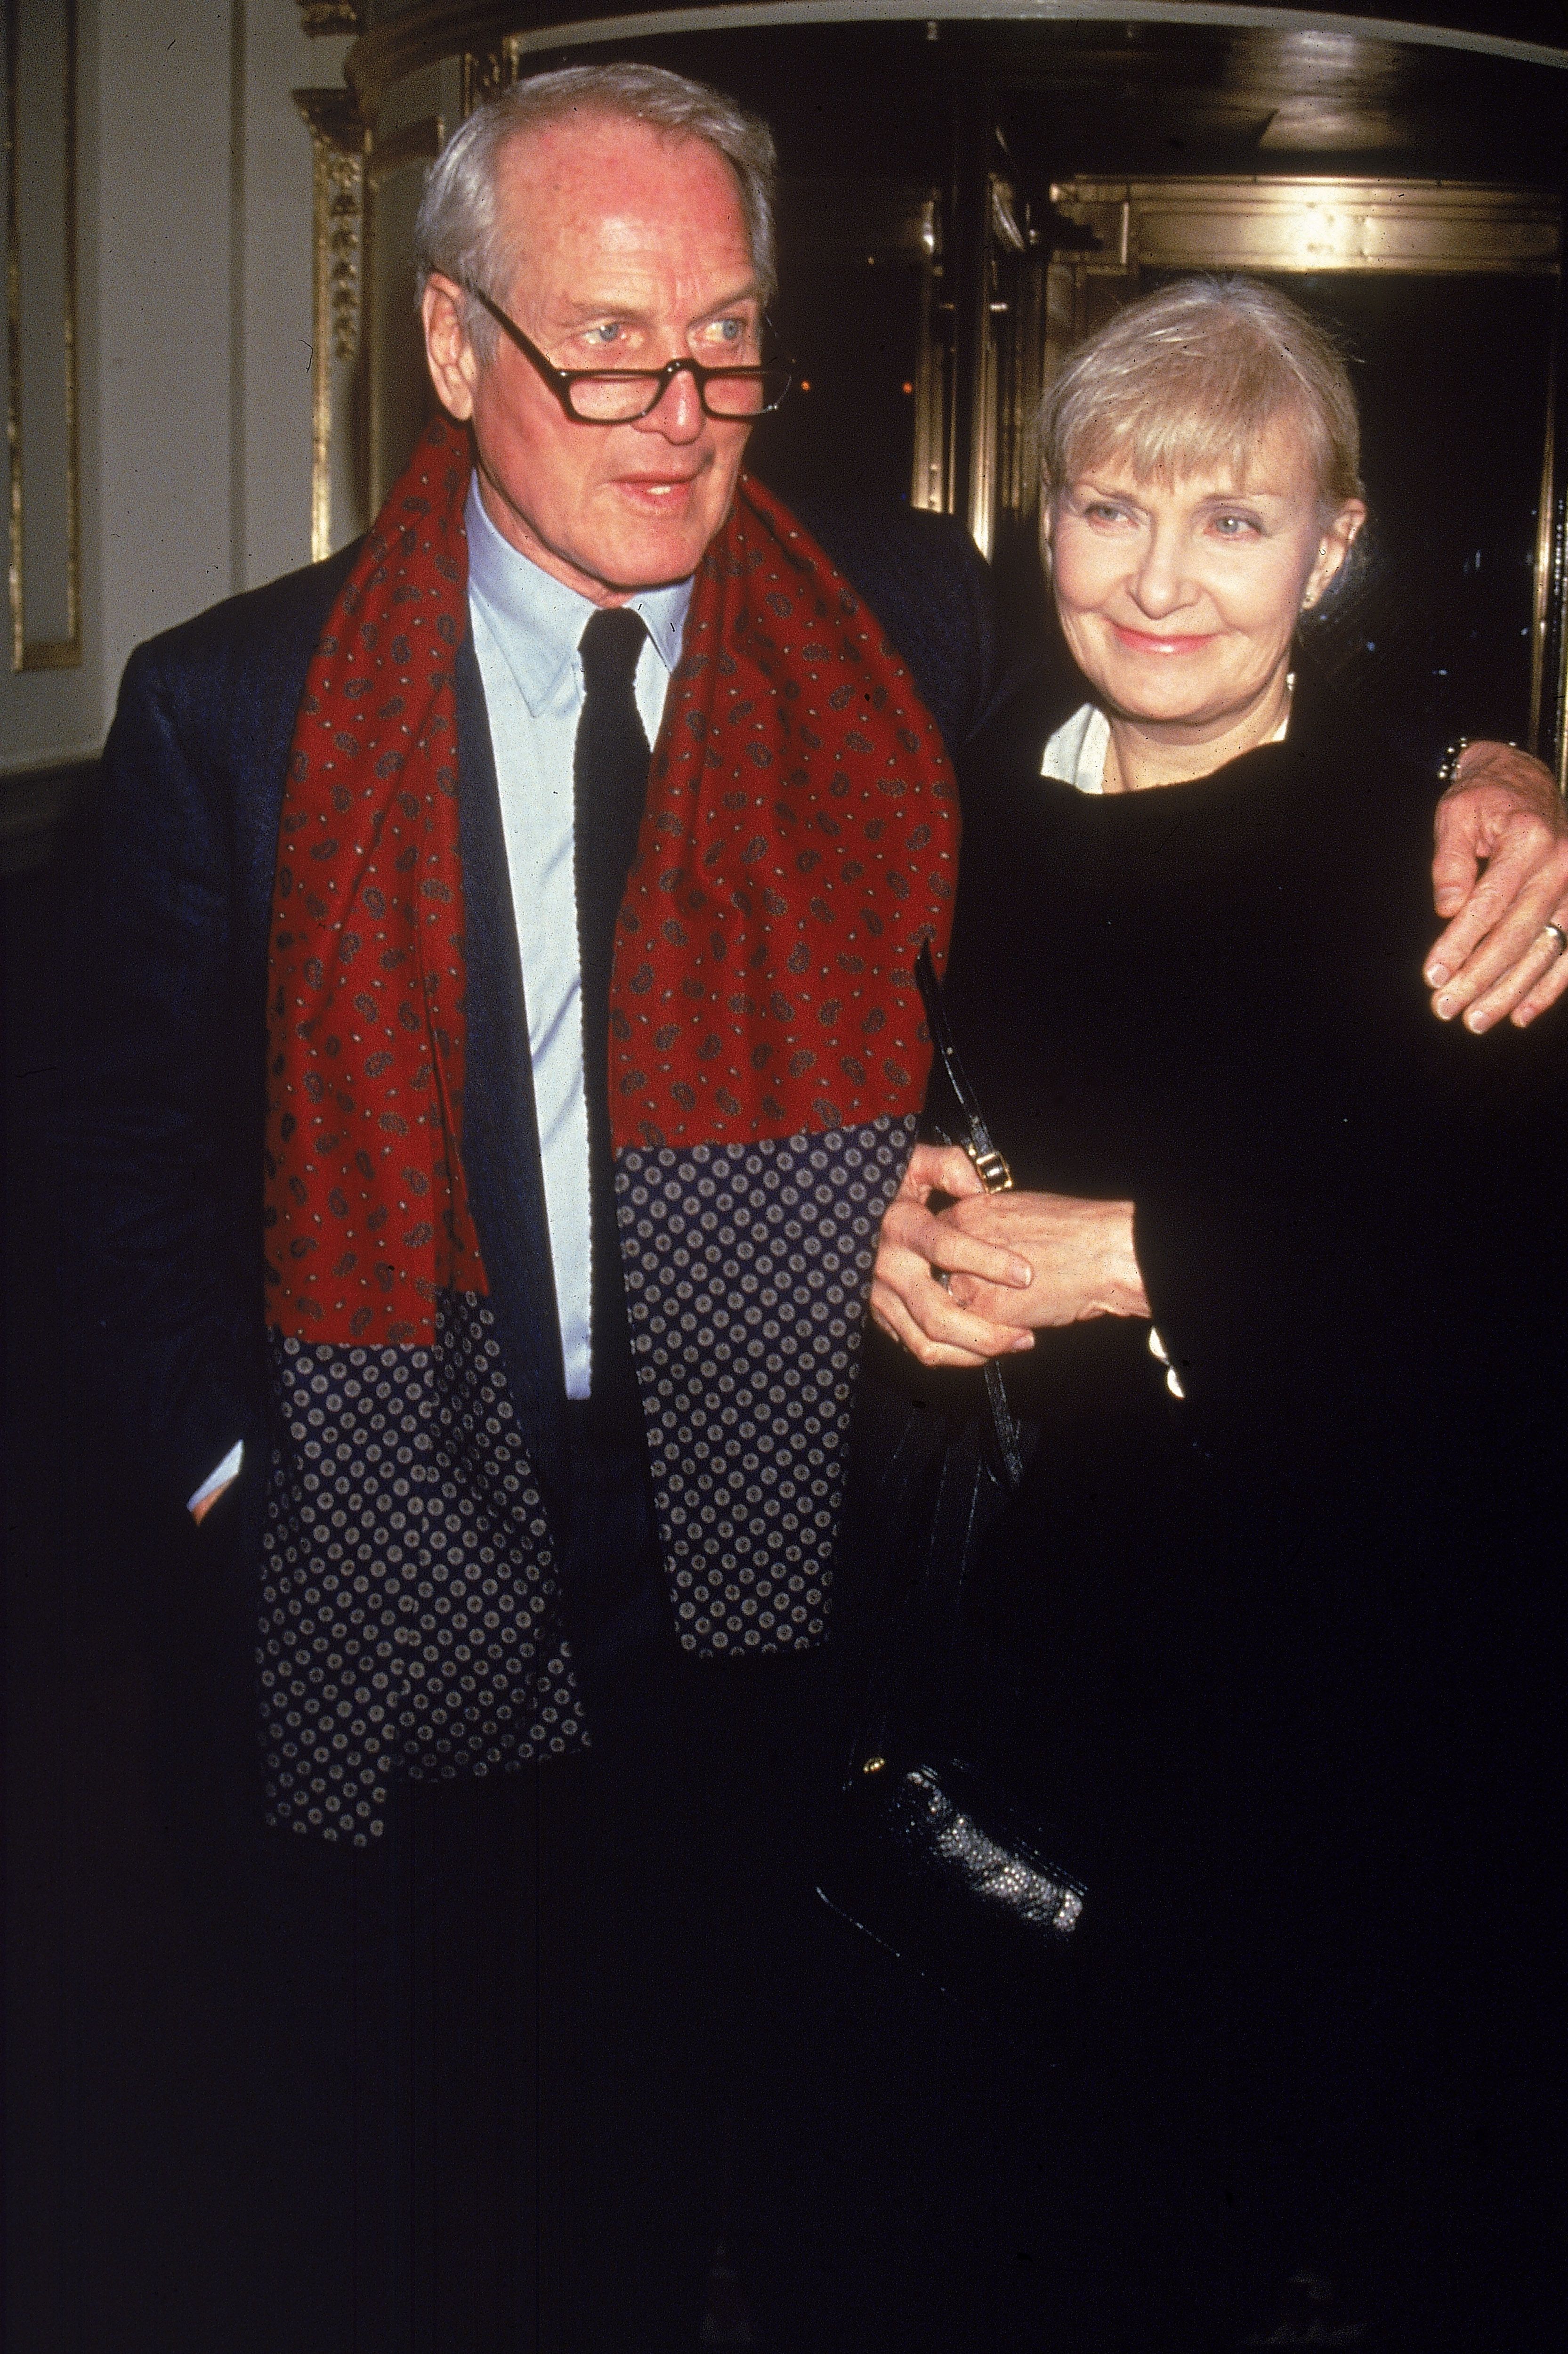 Paul Newman and Joanne Woodward at the premiere of the film "Nobody's Fool", 1994 | Photo: Getty Images